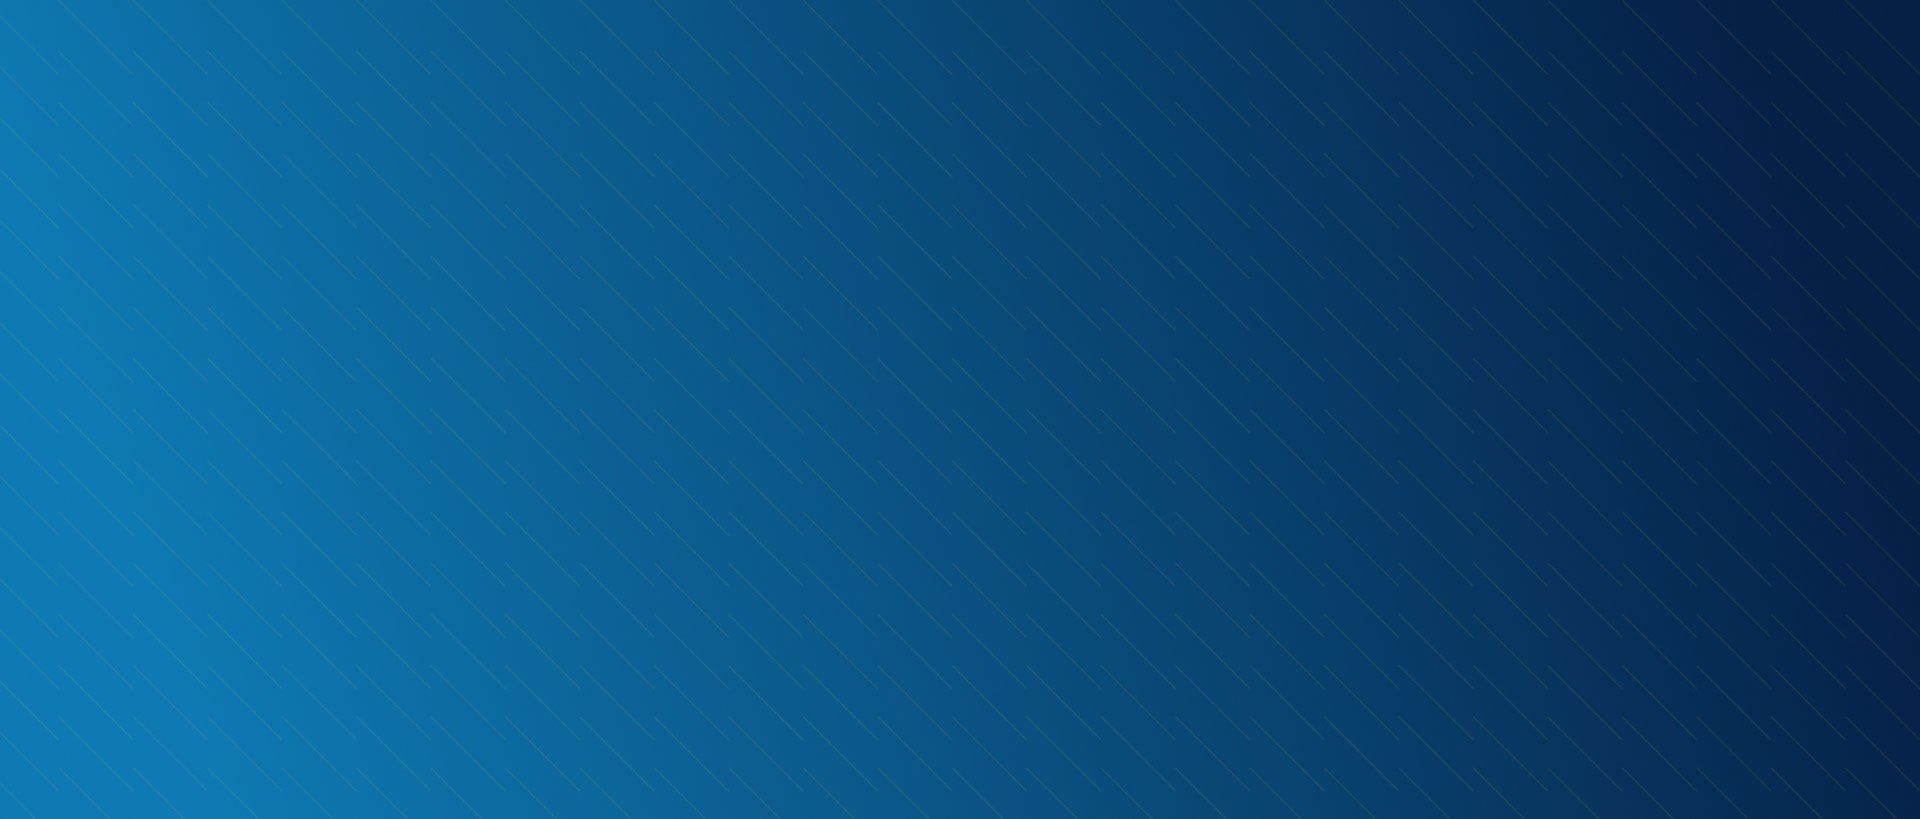 Textured background of blue with diagonal yellow lines.